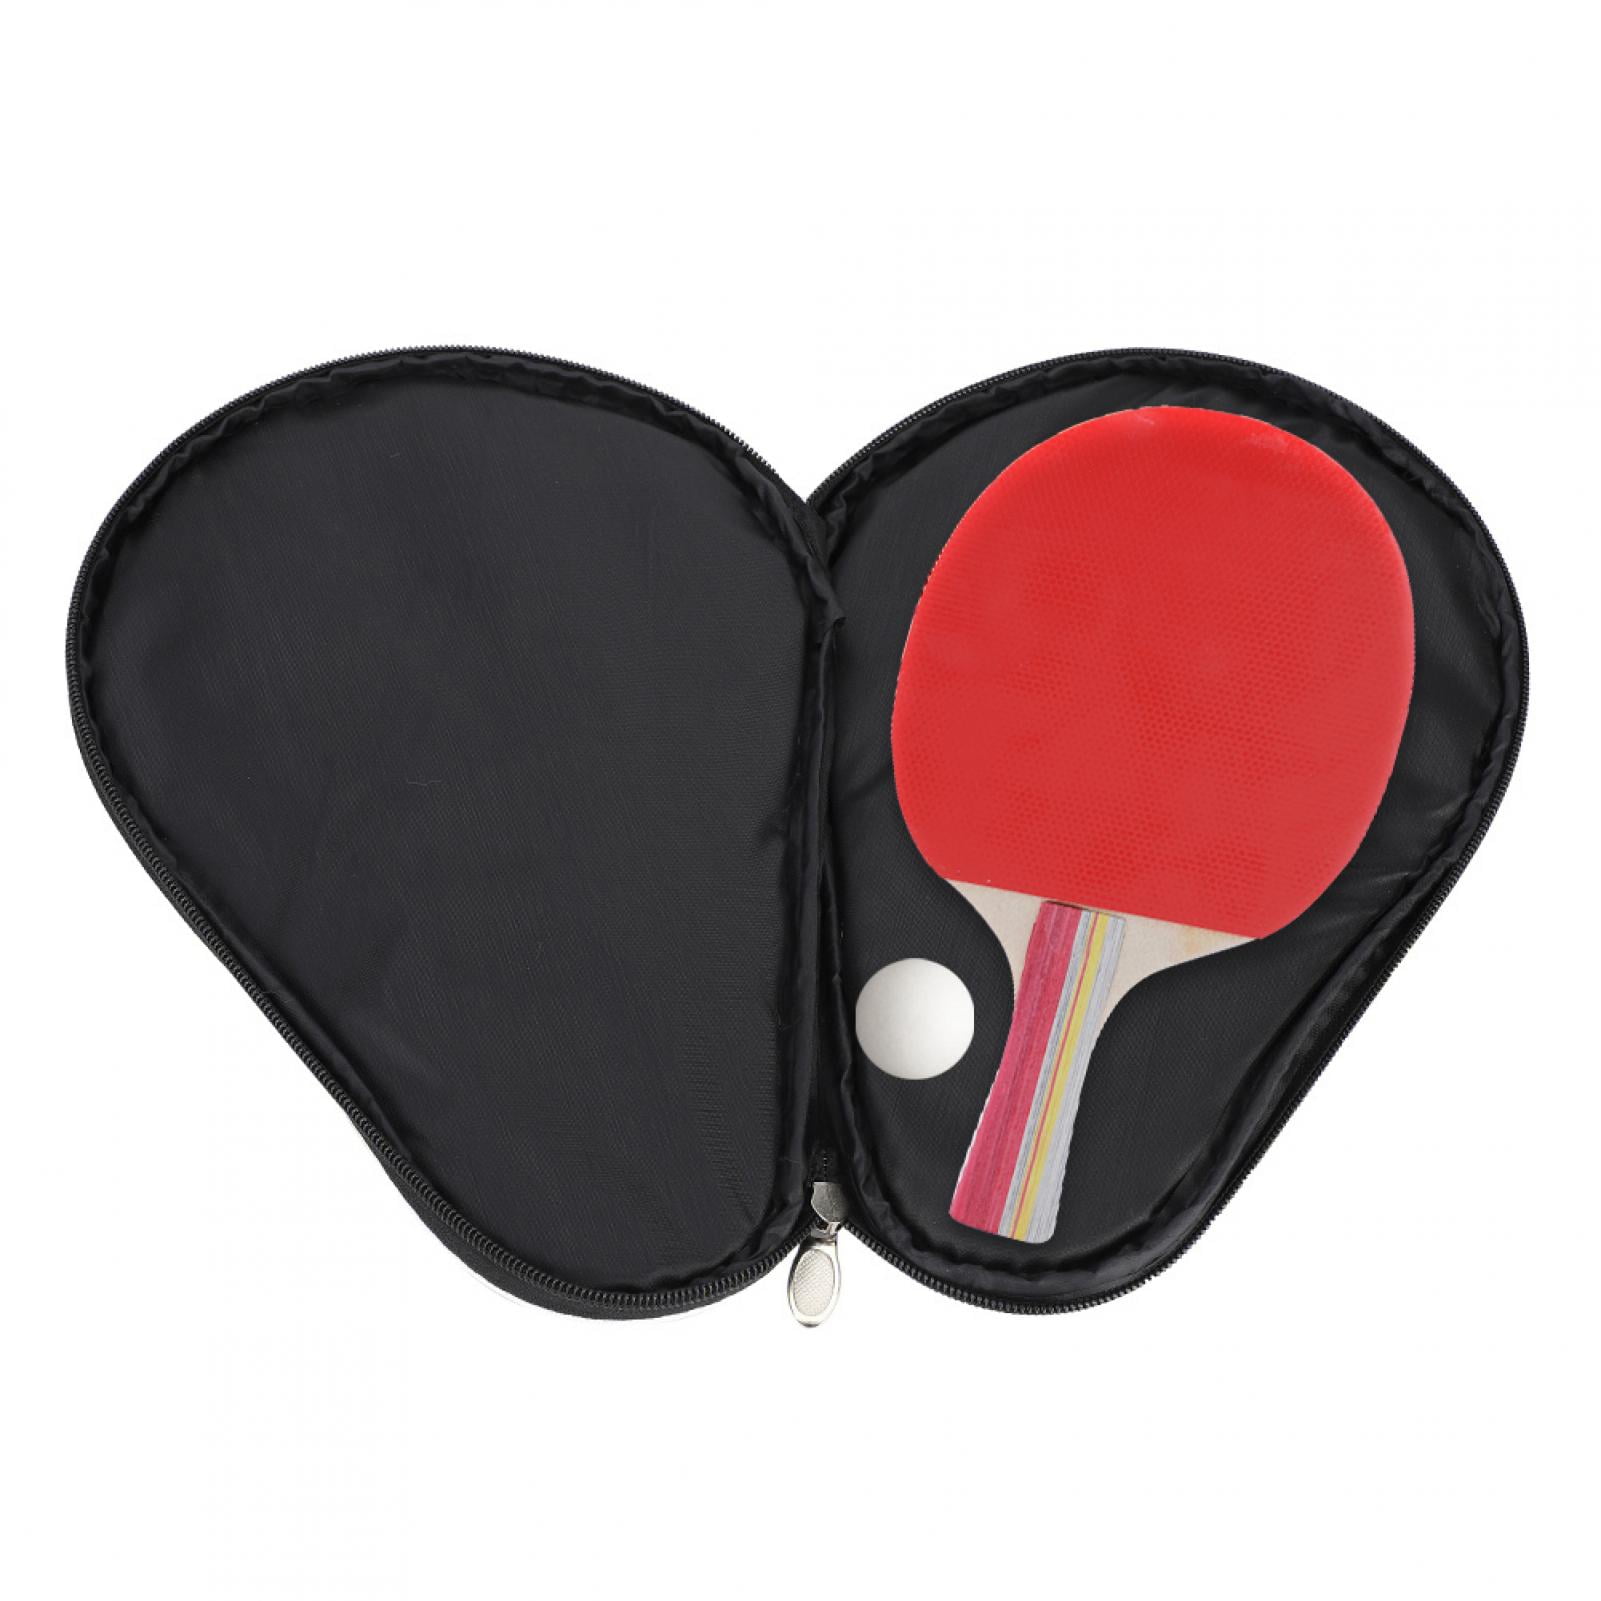 Butterfly BD Table Tennis Racket Full Cover Ping Pong Racket Case 